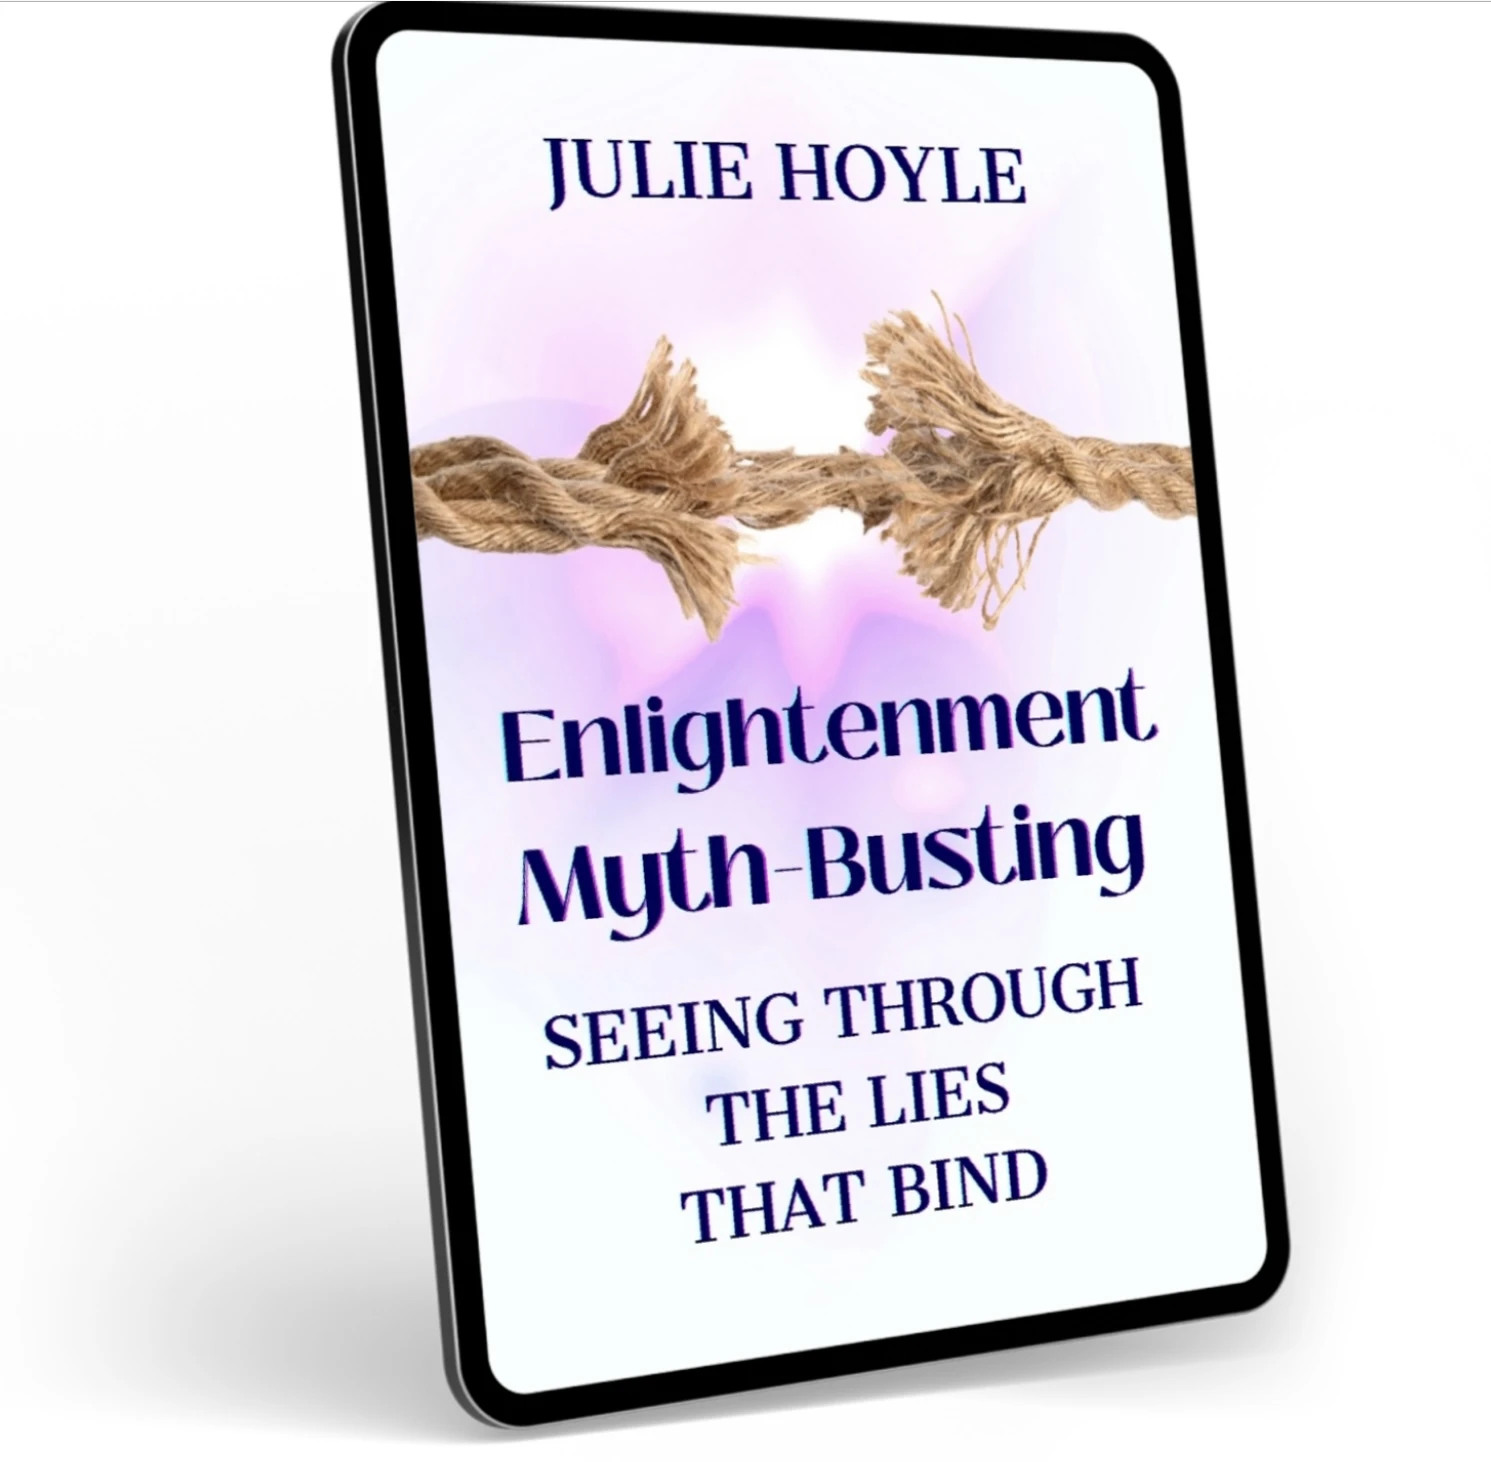 Enlightenment Myth-Busting, Seeing Through the Lies That Bind